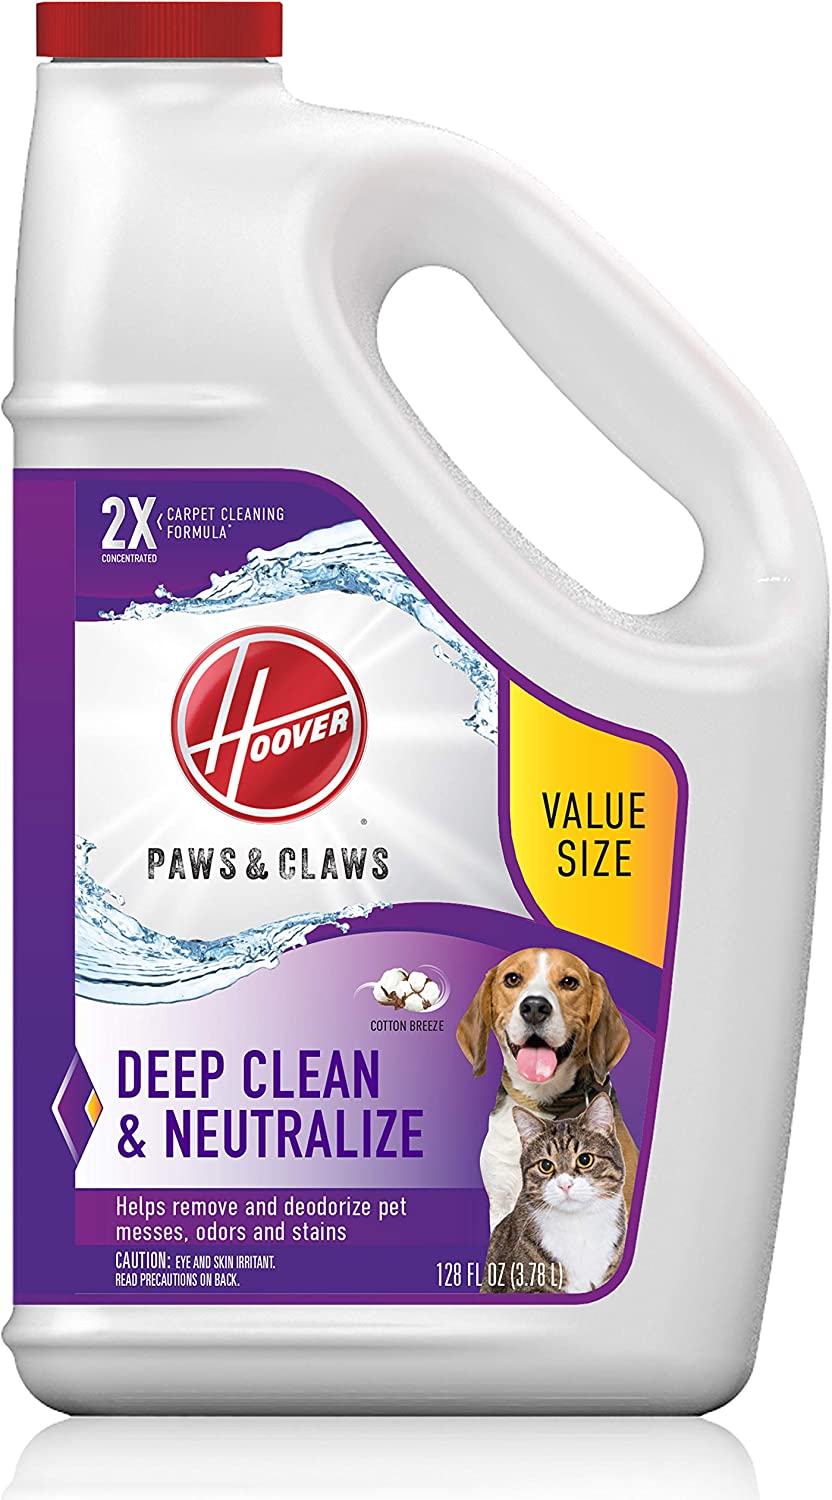 128-Oz Hoover Paws & Claws Deep Cleaning Carpet Shampoo w/ Pet Spot & Stain Remover $17.95 w/ S&S + Free Shipping w/ Prime or on $25+